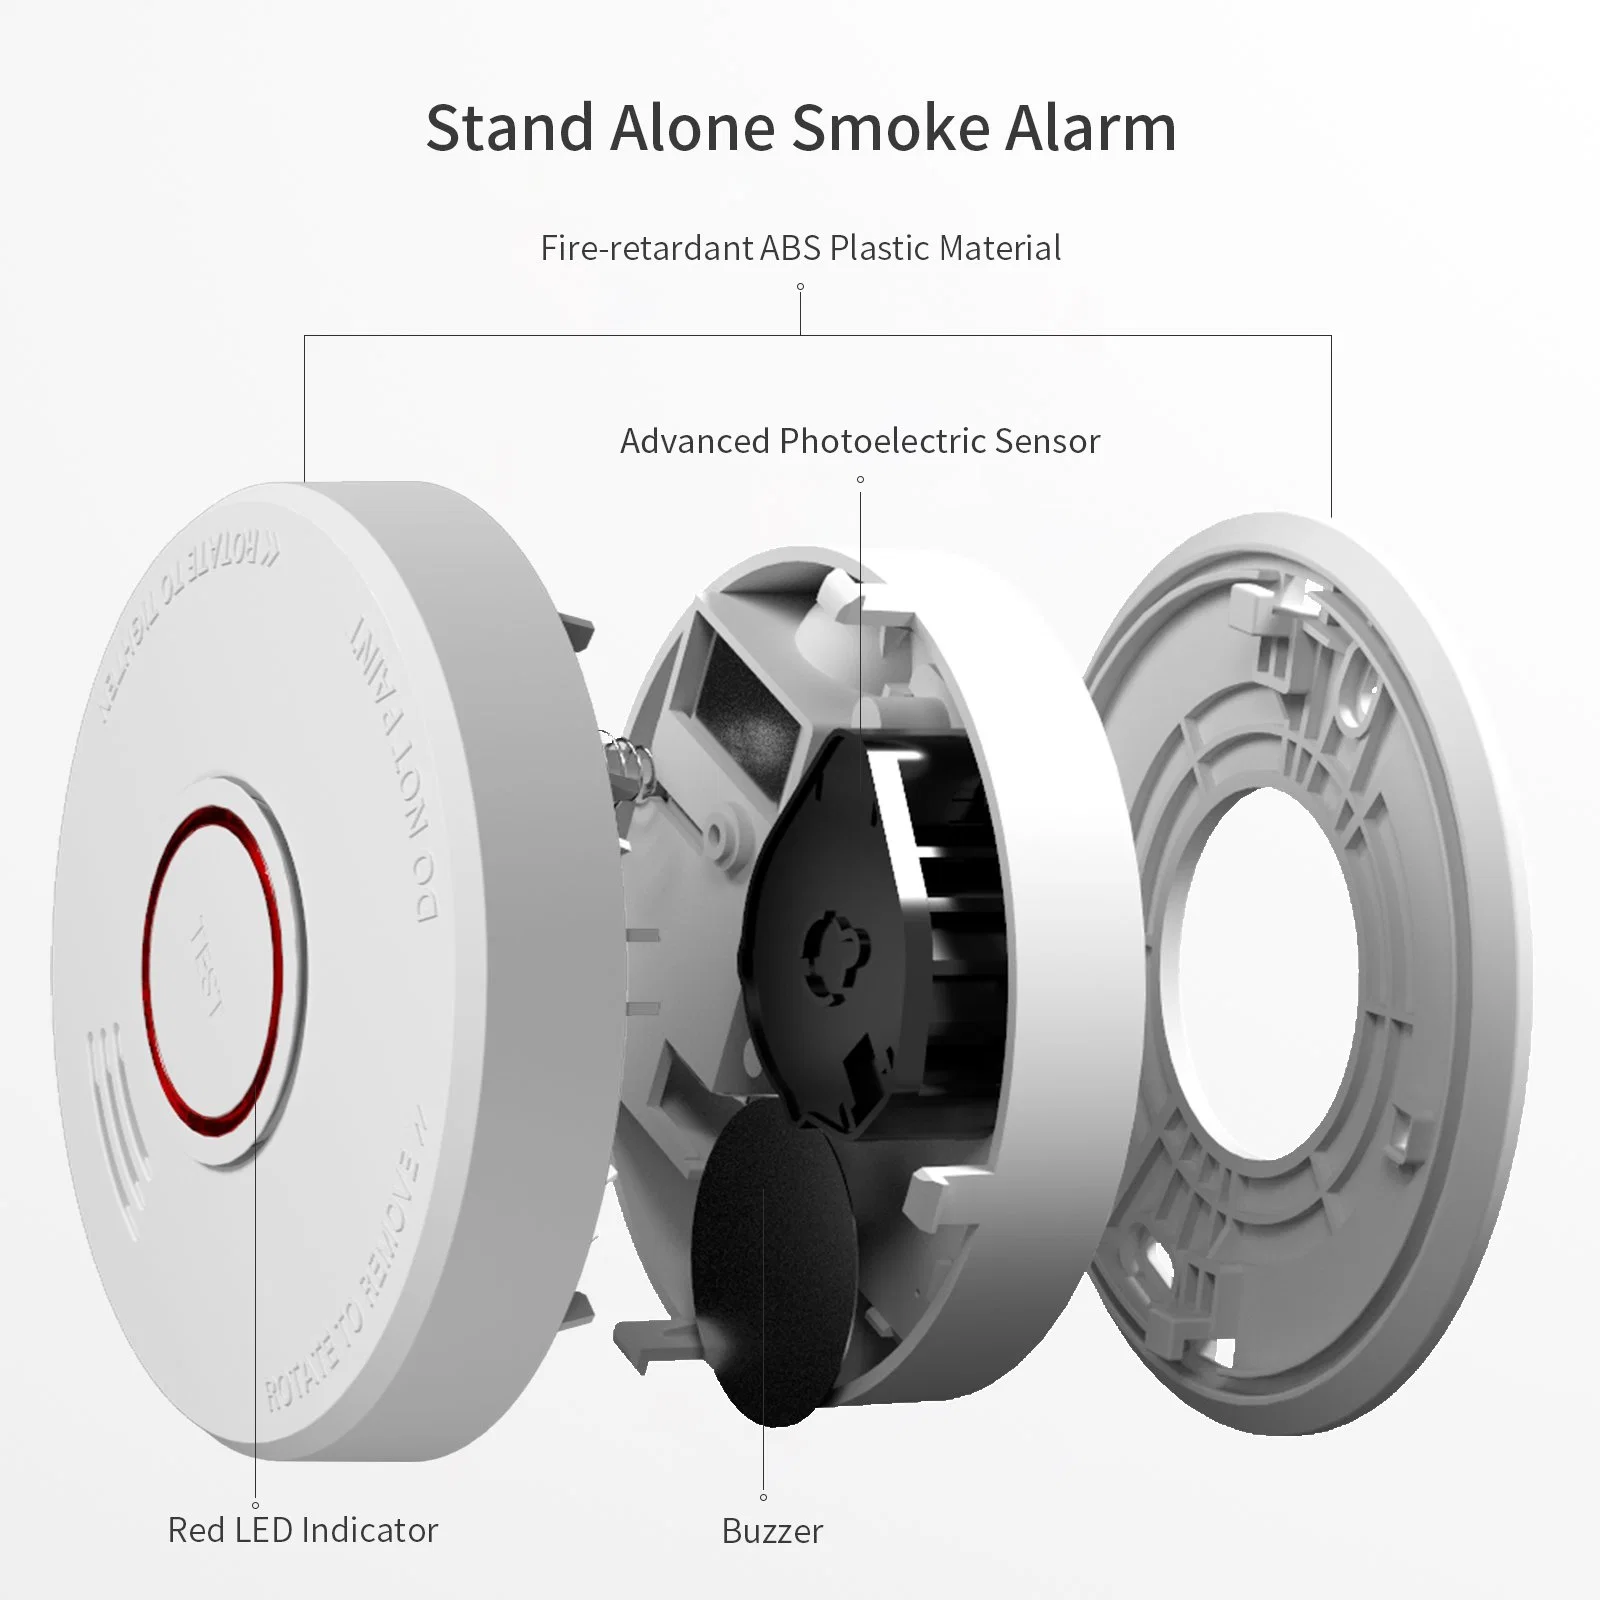 Stand Alone Smoke Alarm with Alkaline Battery